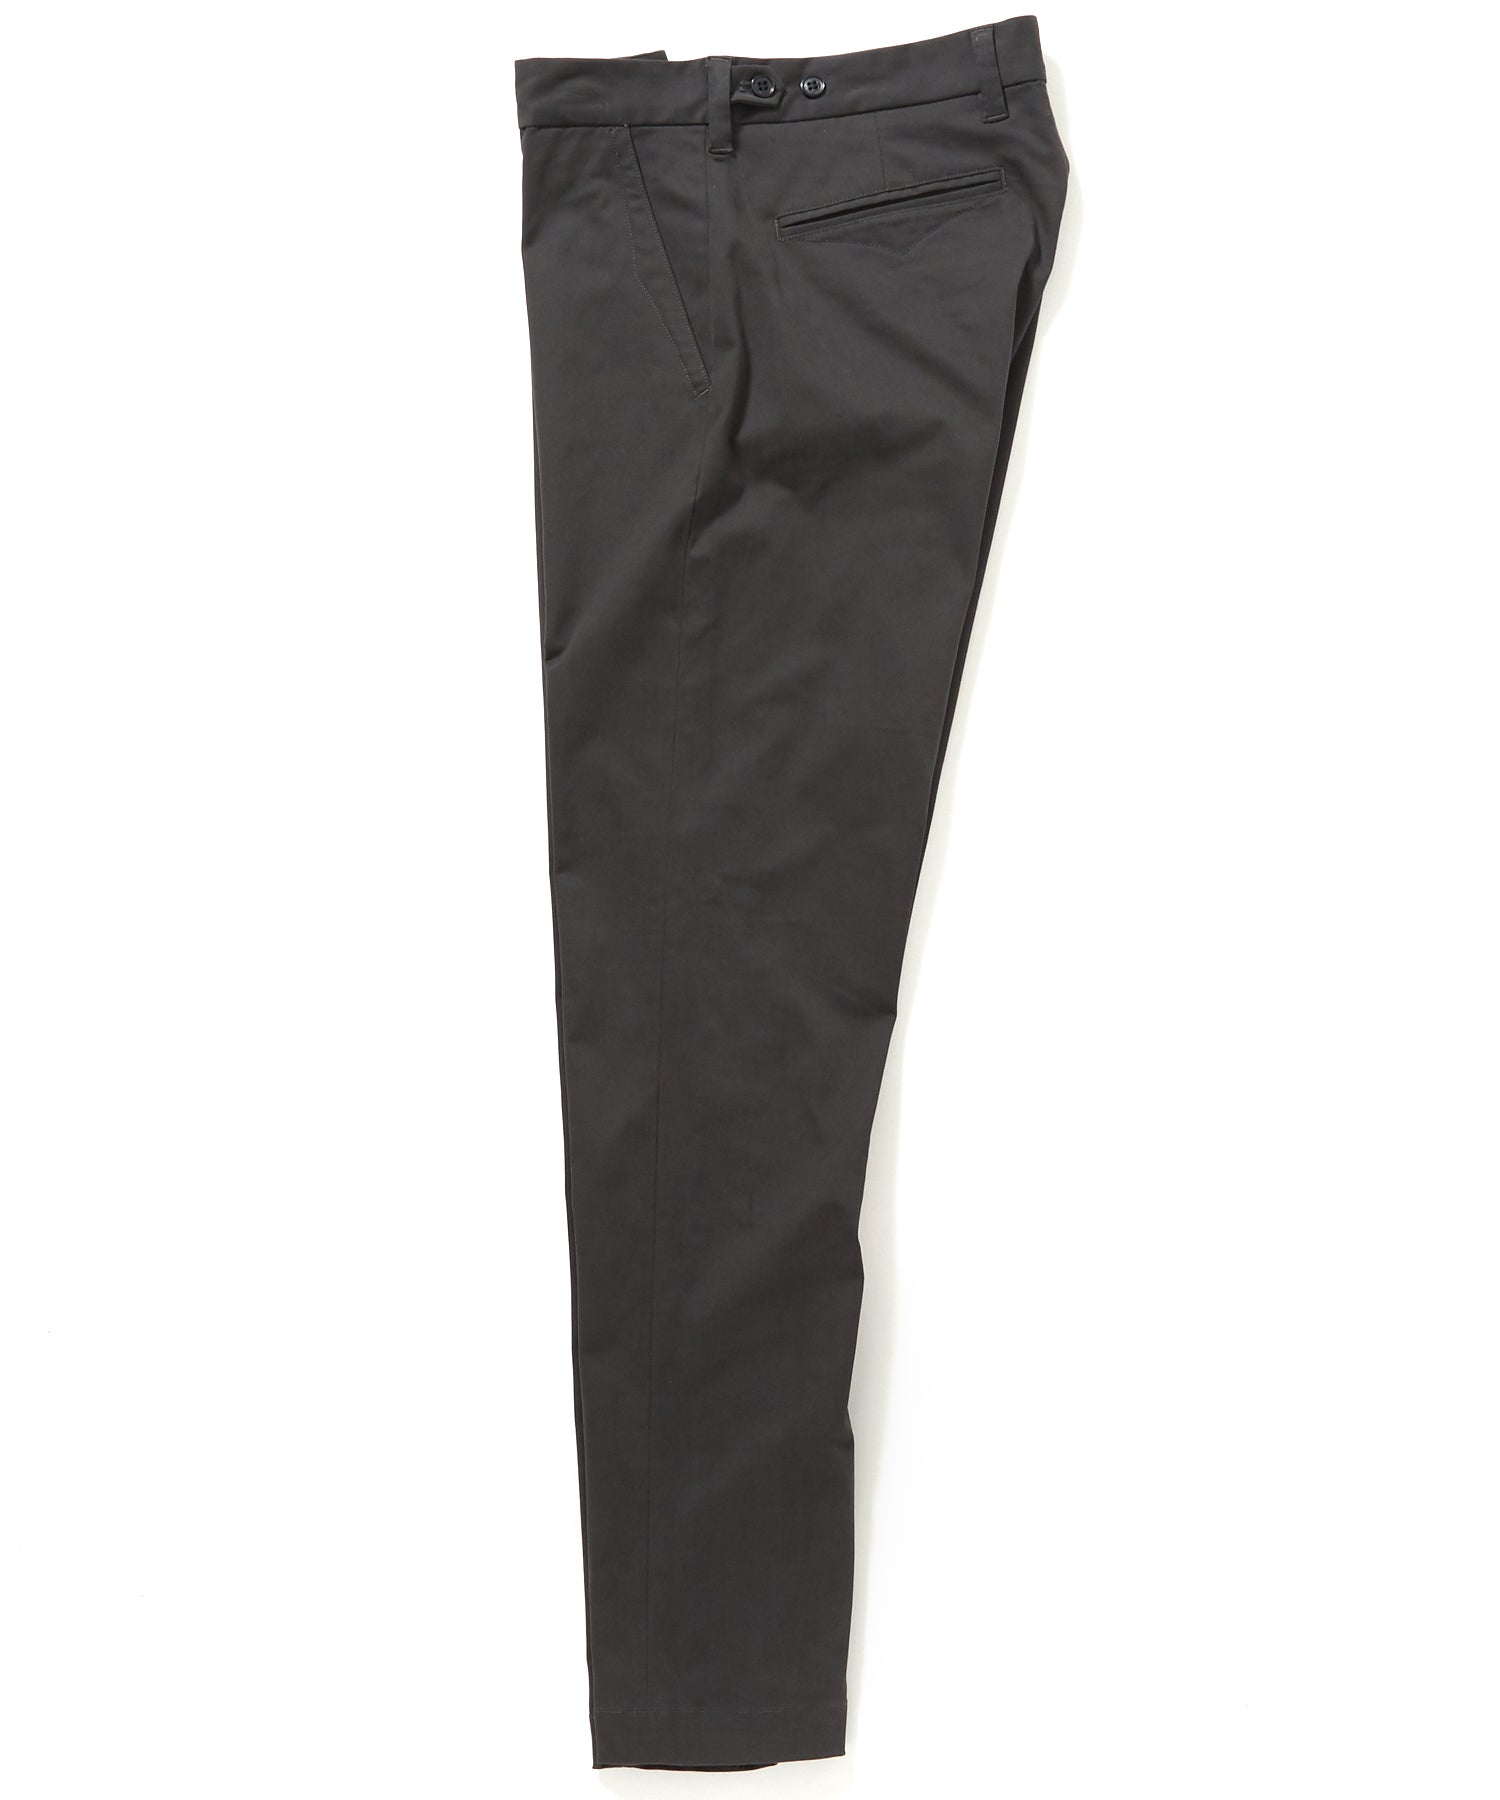 STRETCH CHINO TAPERED SLIM FIT 1550 PANTS